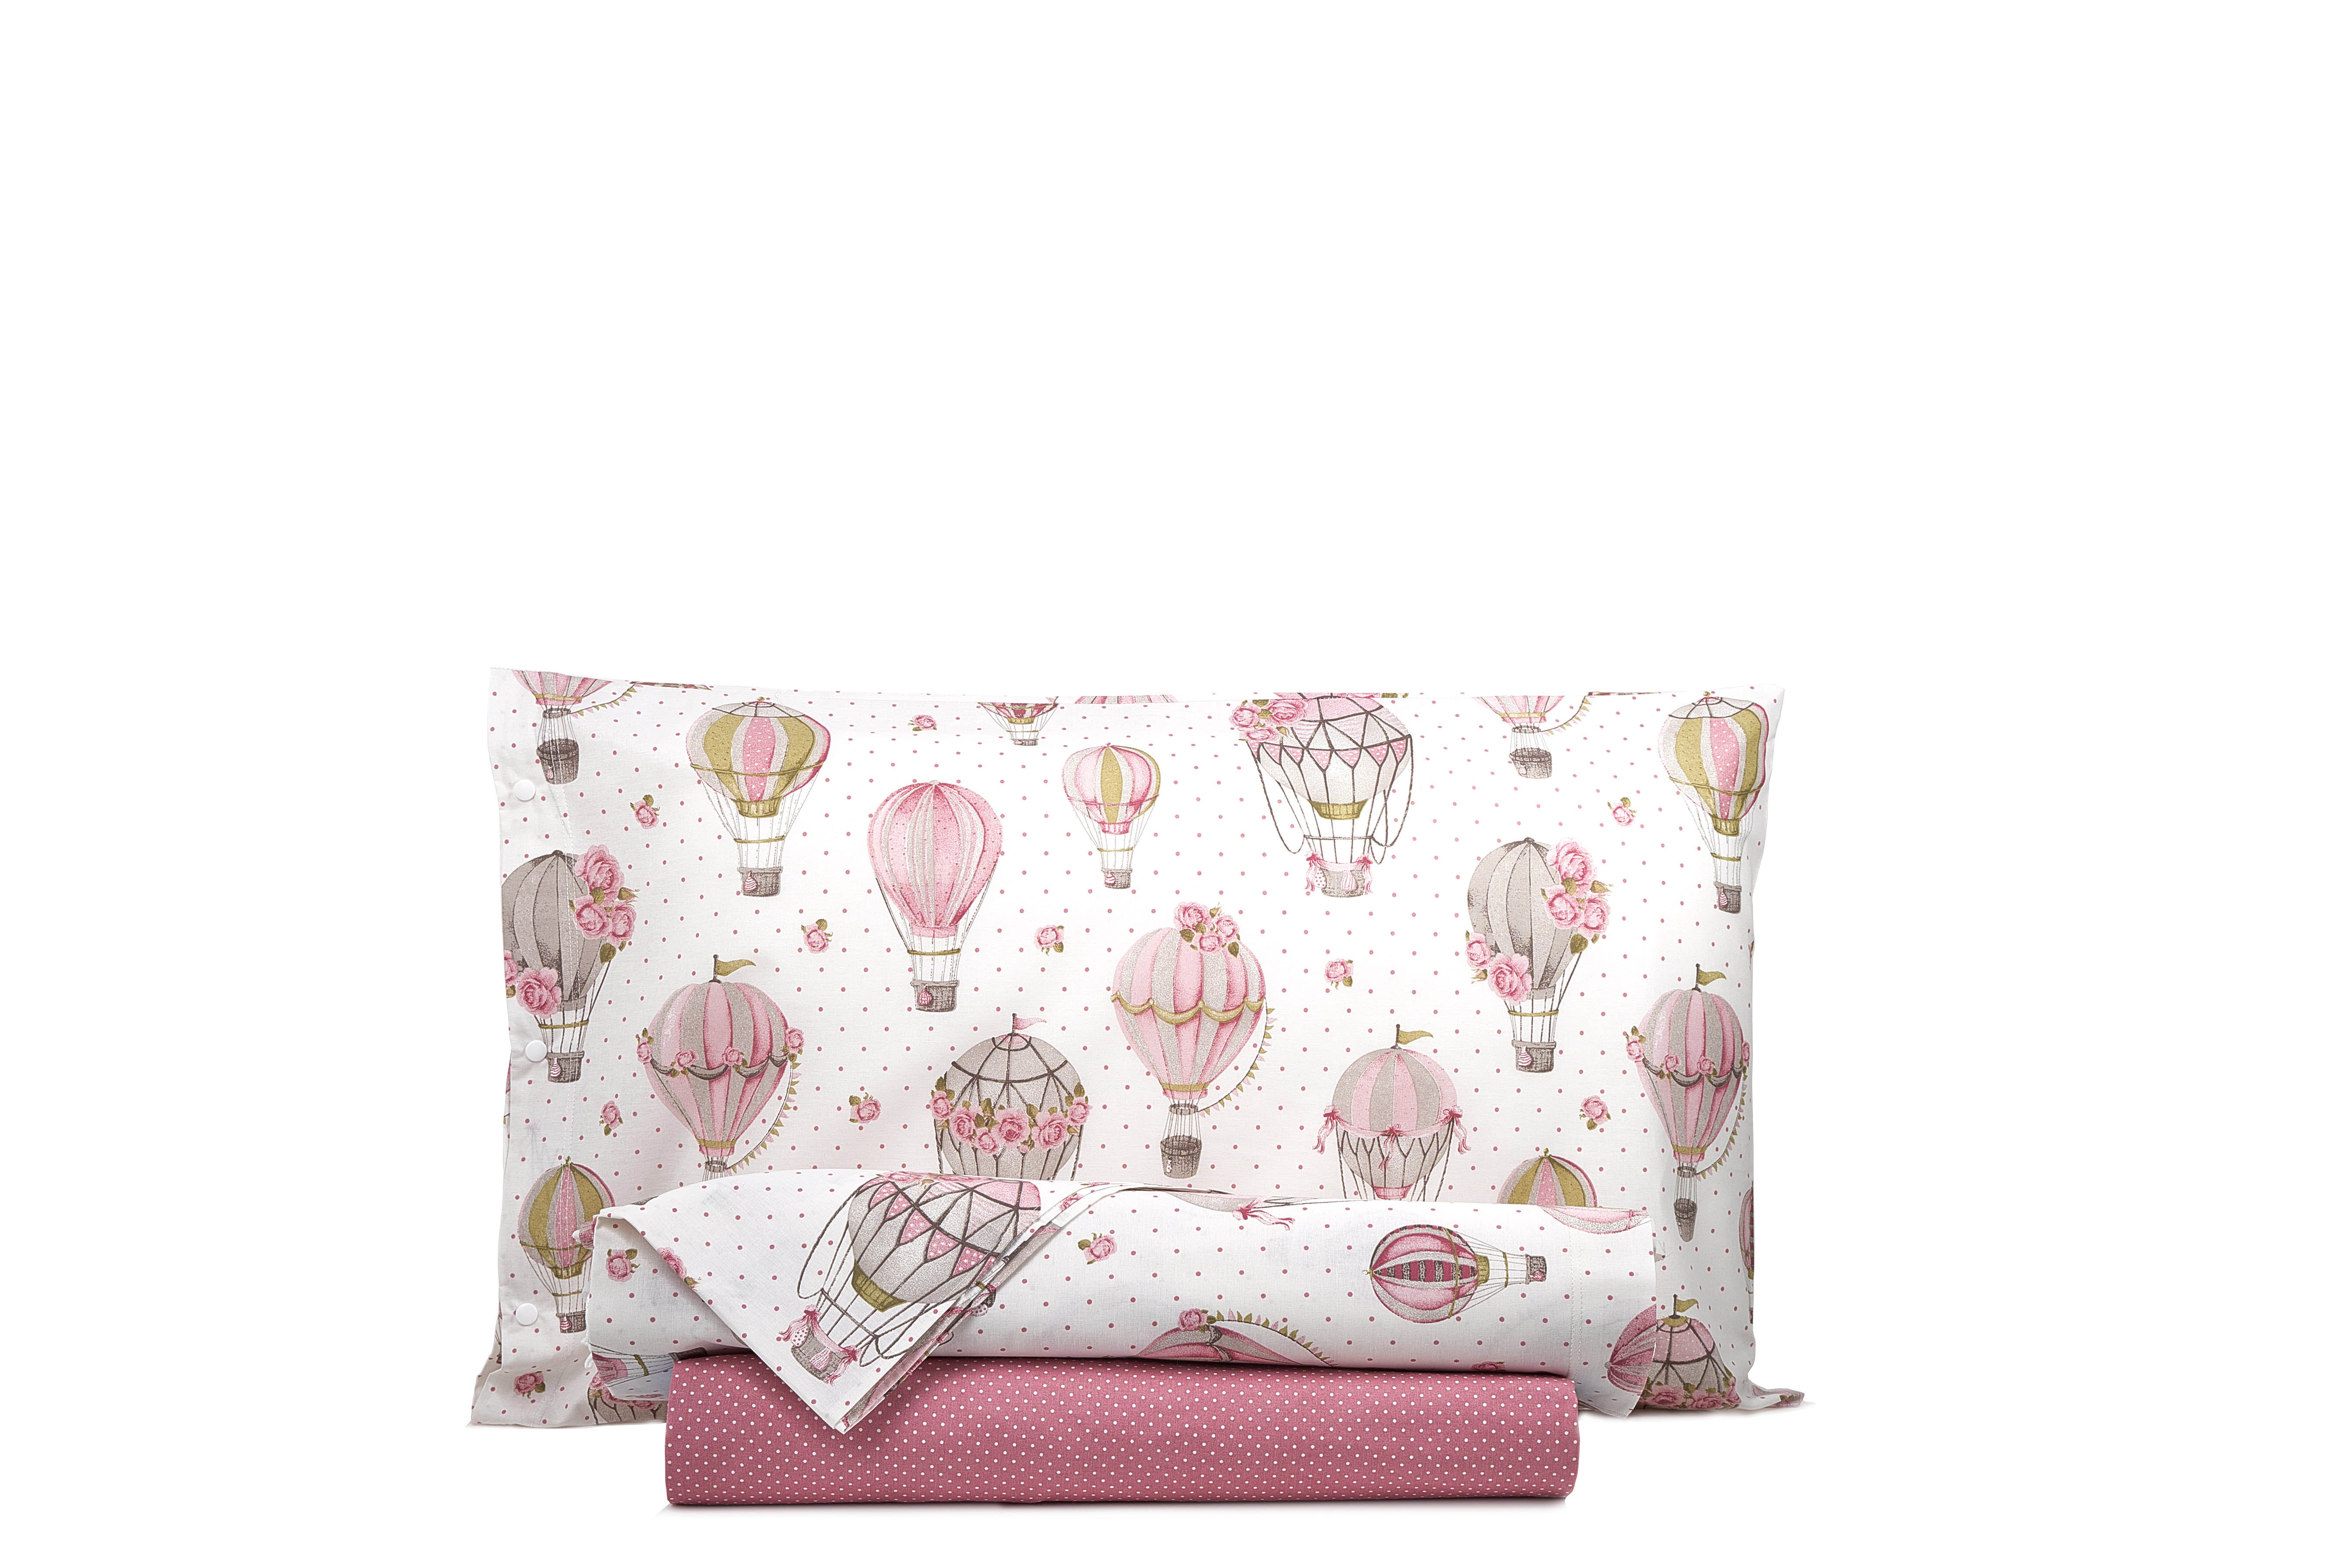 Completo letto lenzuola 100% cotone made in italy MONGOLFIERE ROSA - SmartDecoHome